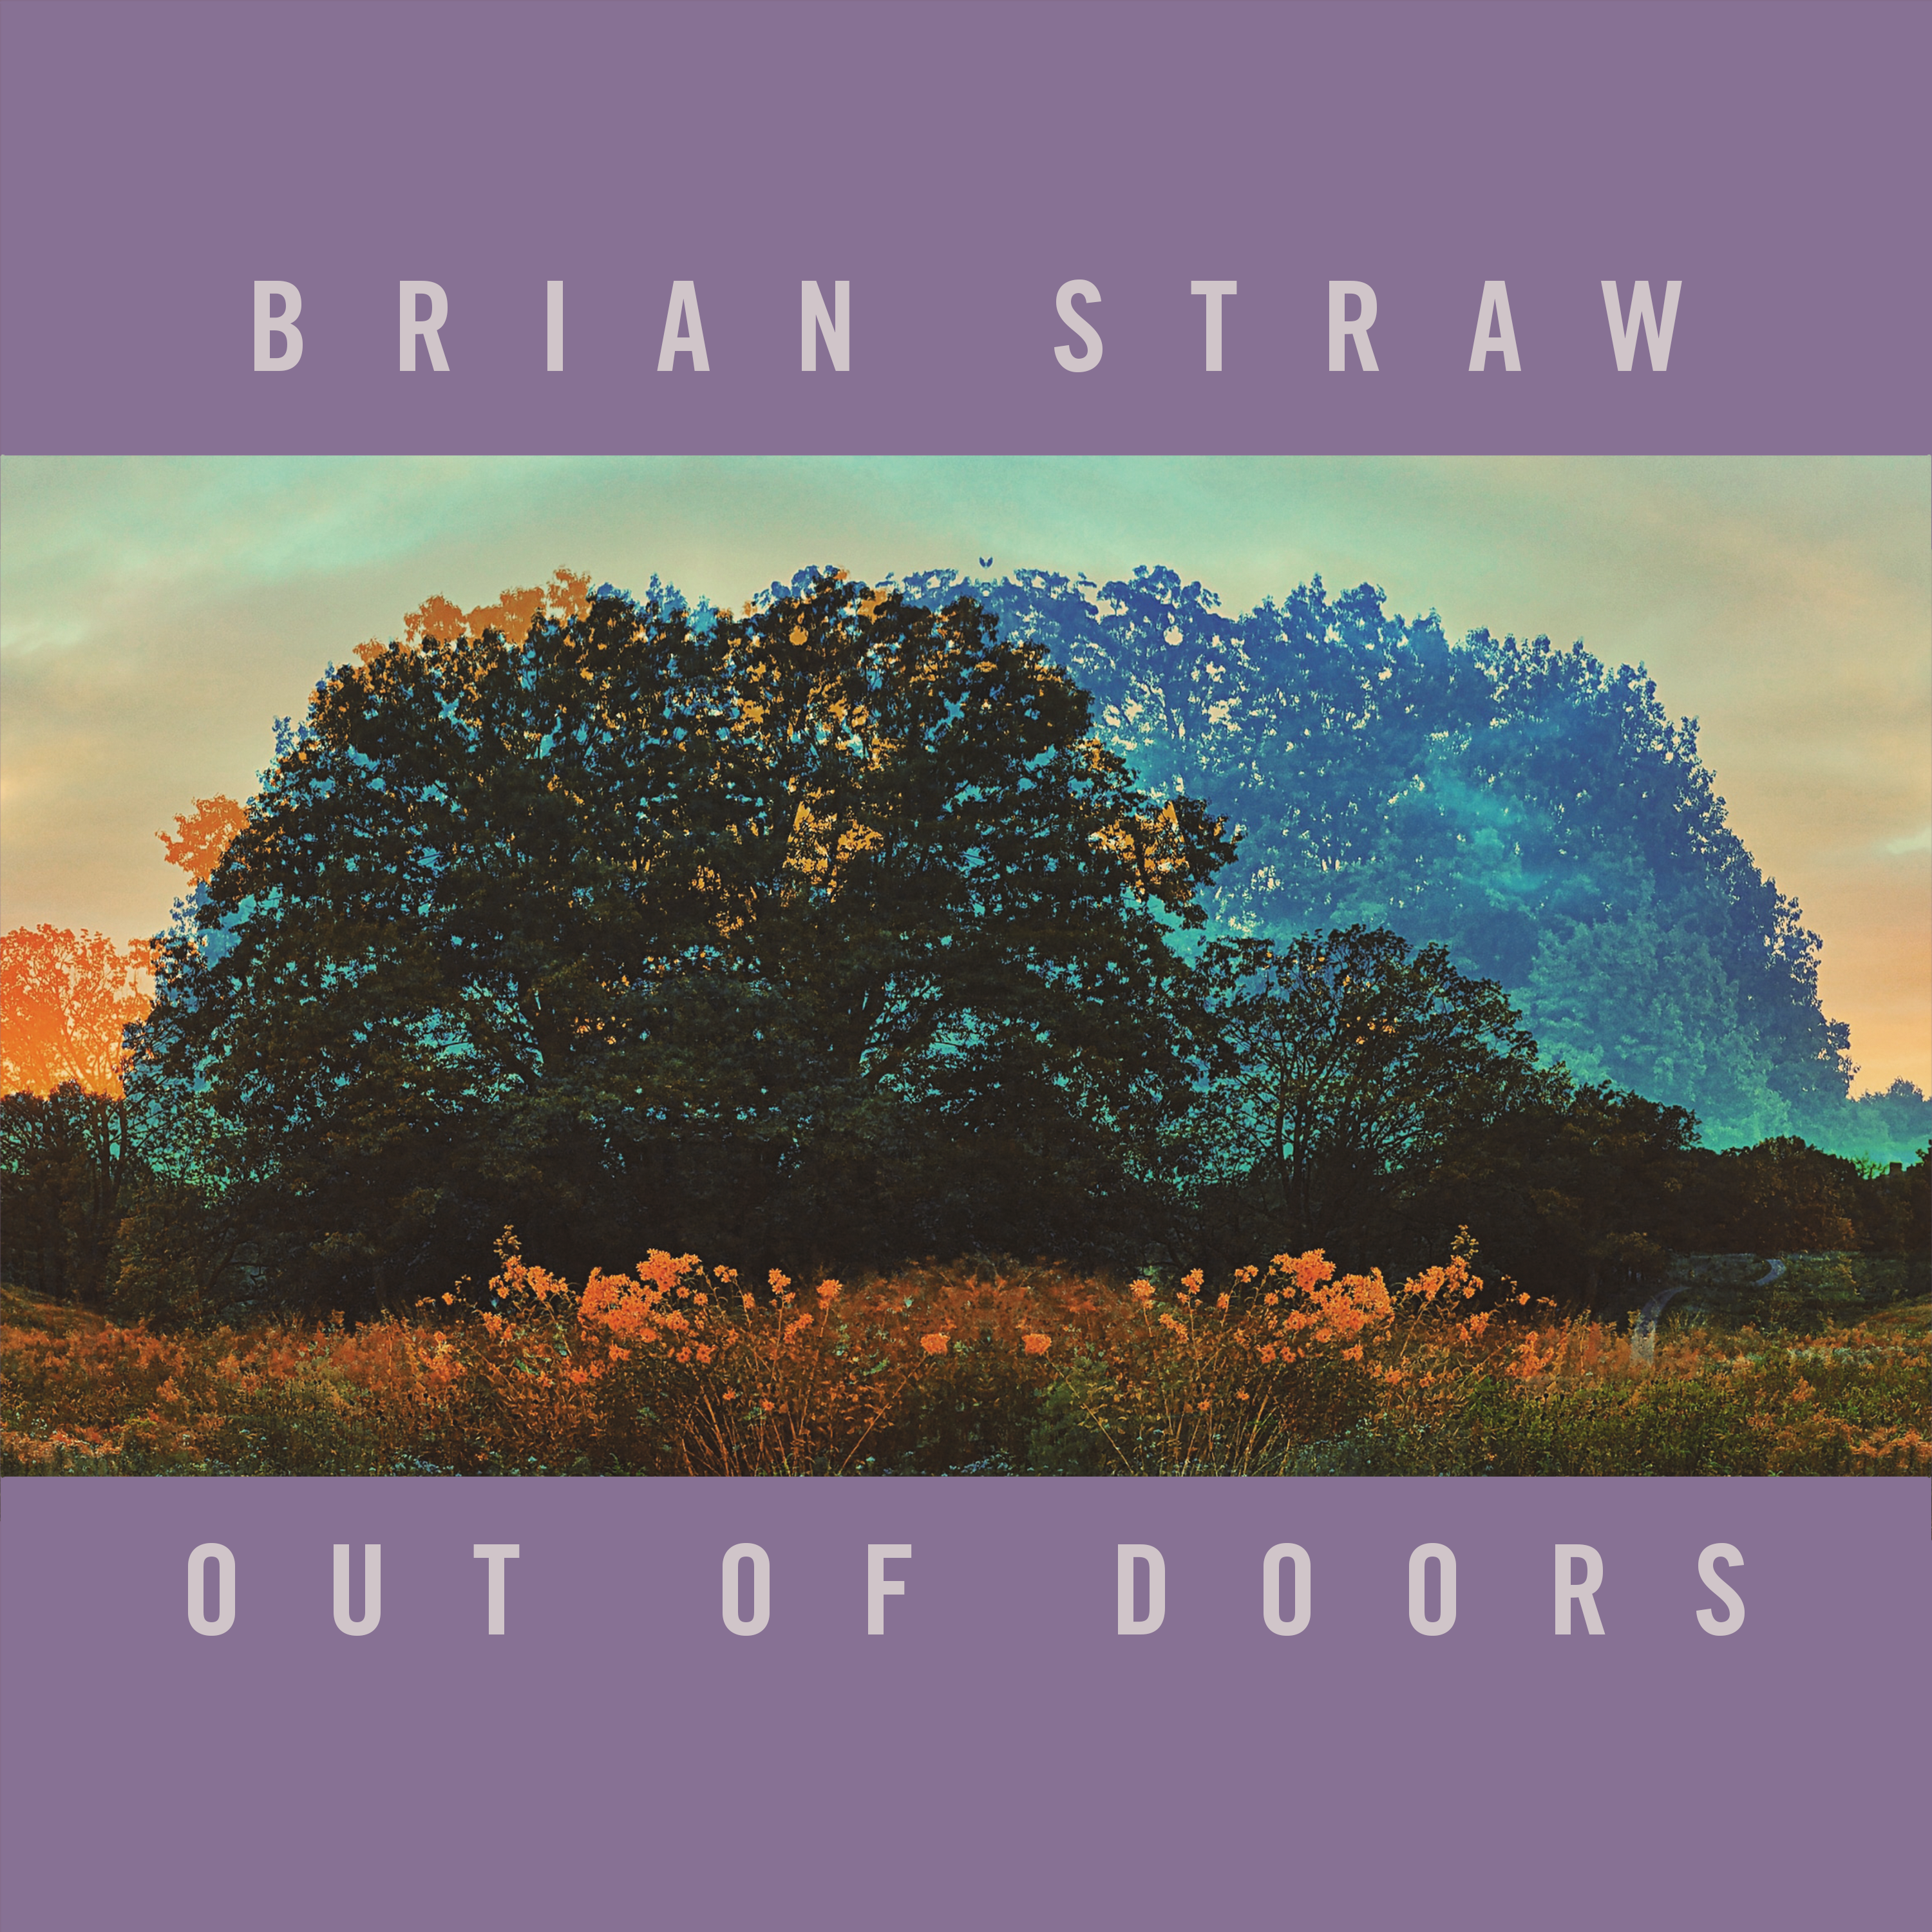 Singer-songwriter BRIAN STRAW unveils first music video,  “OUT OF DOORS”